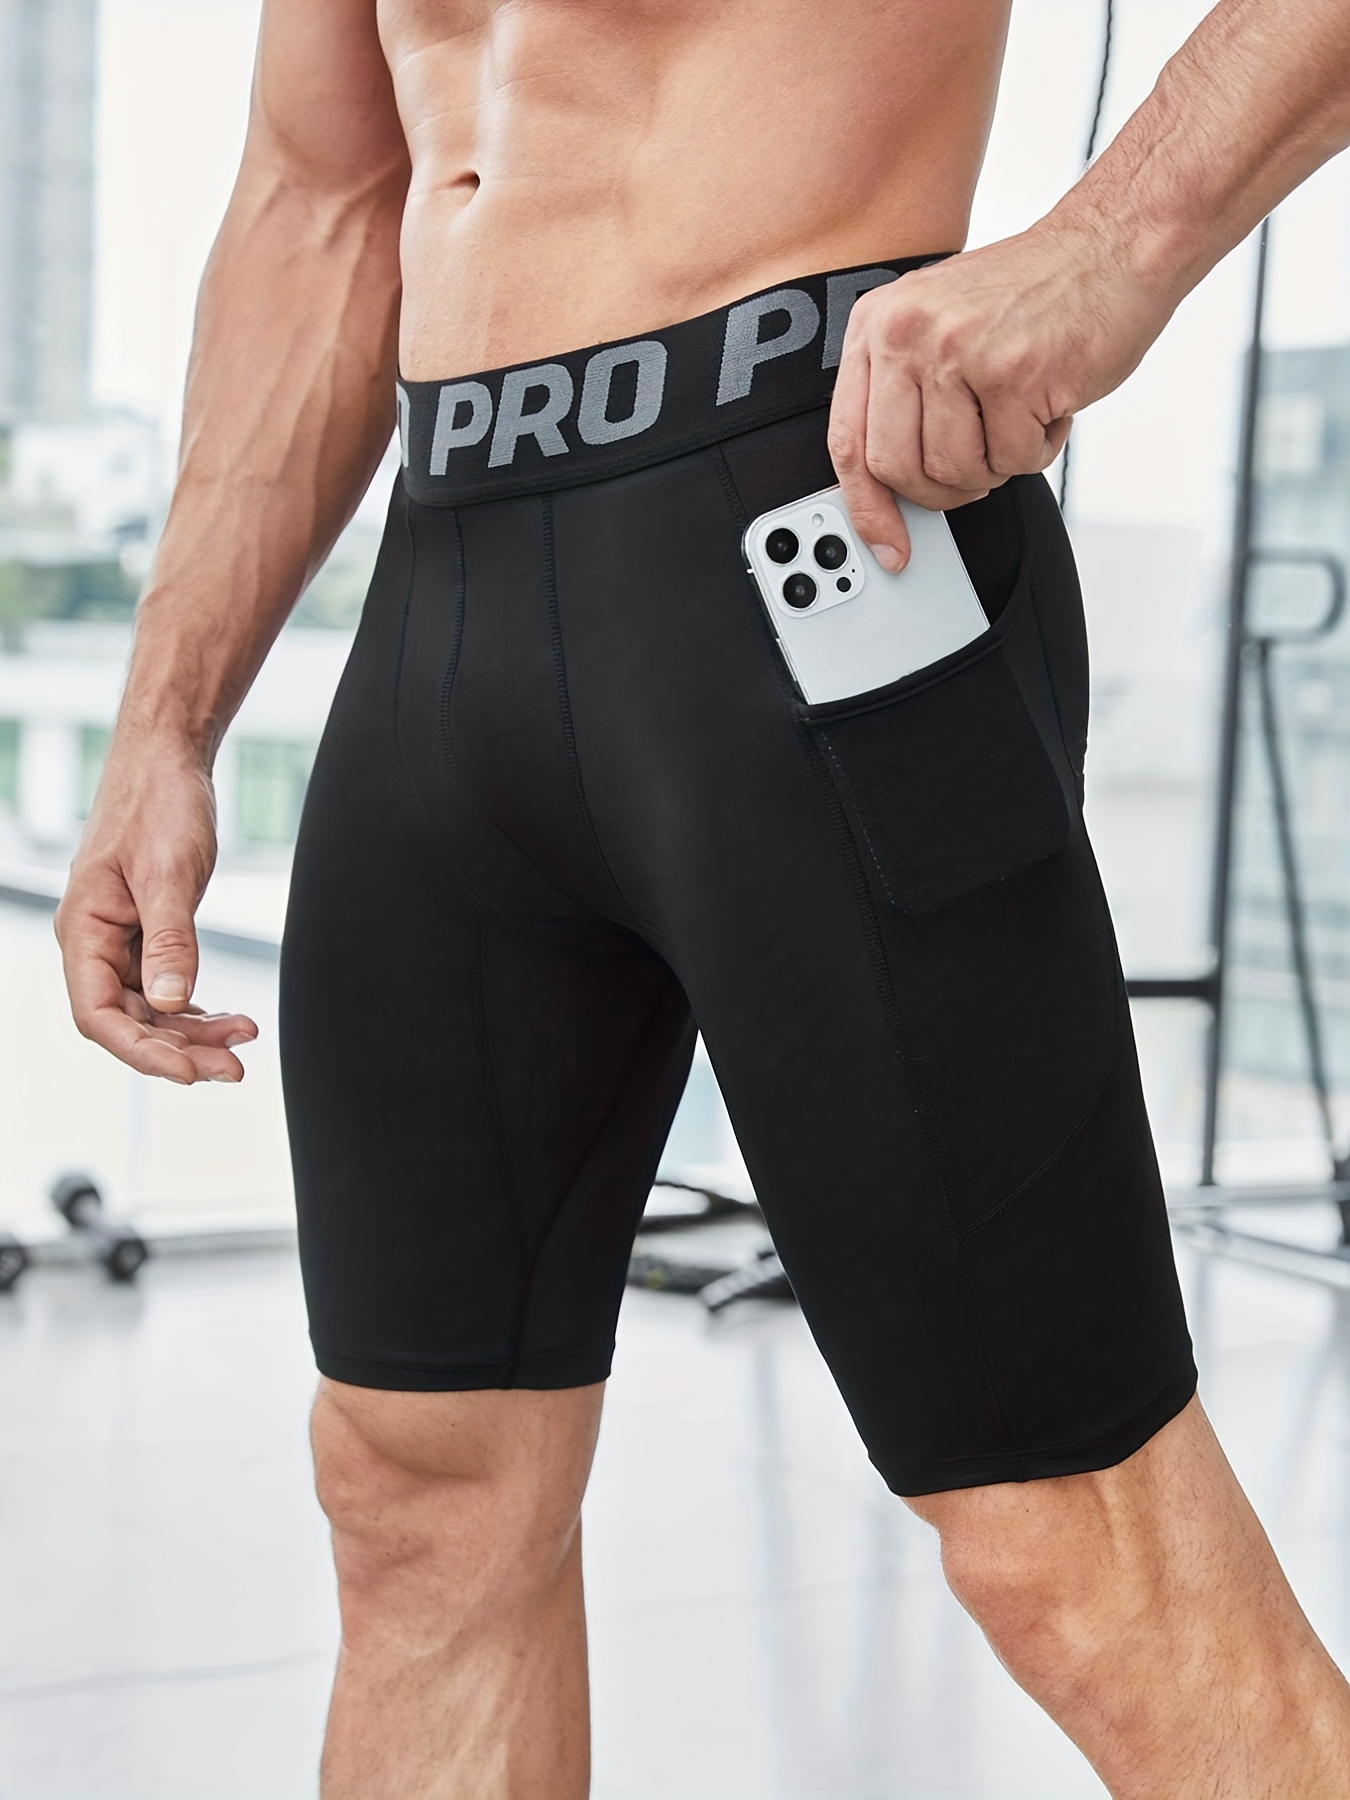 Men's Sports PRO Elastic Quick Drying Sweatwicking Shorts Tights,  Compression Shorts Performance Tights Athletic Base Layer Underwear For  Workout